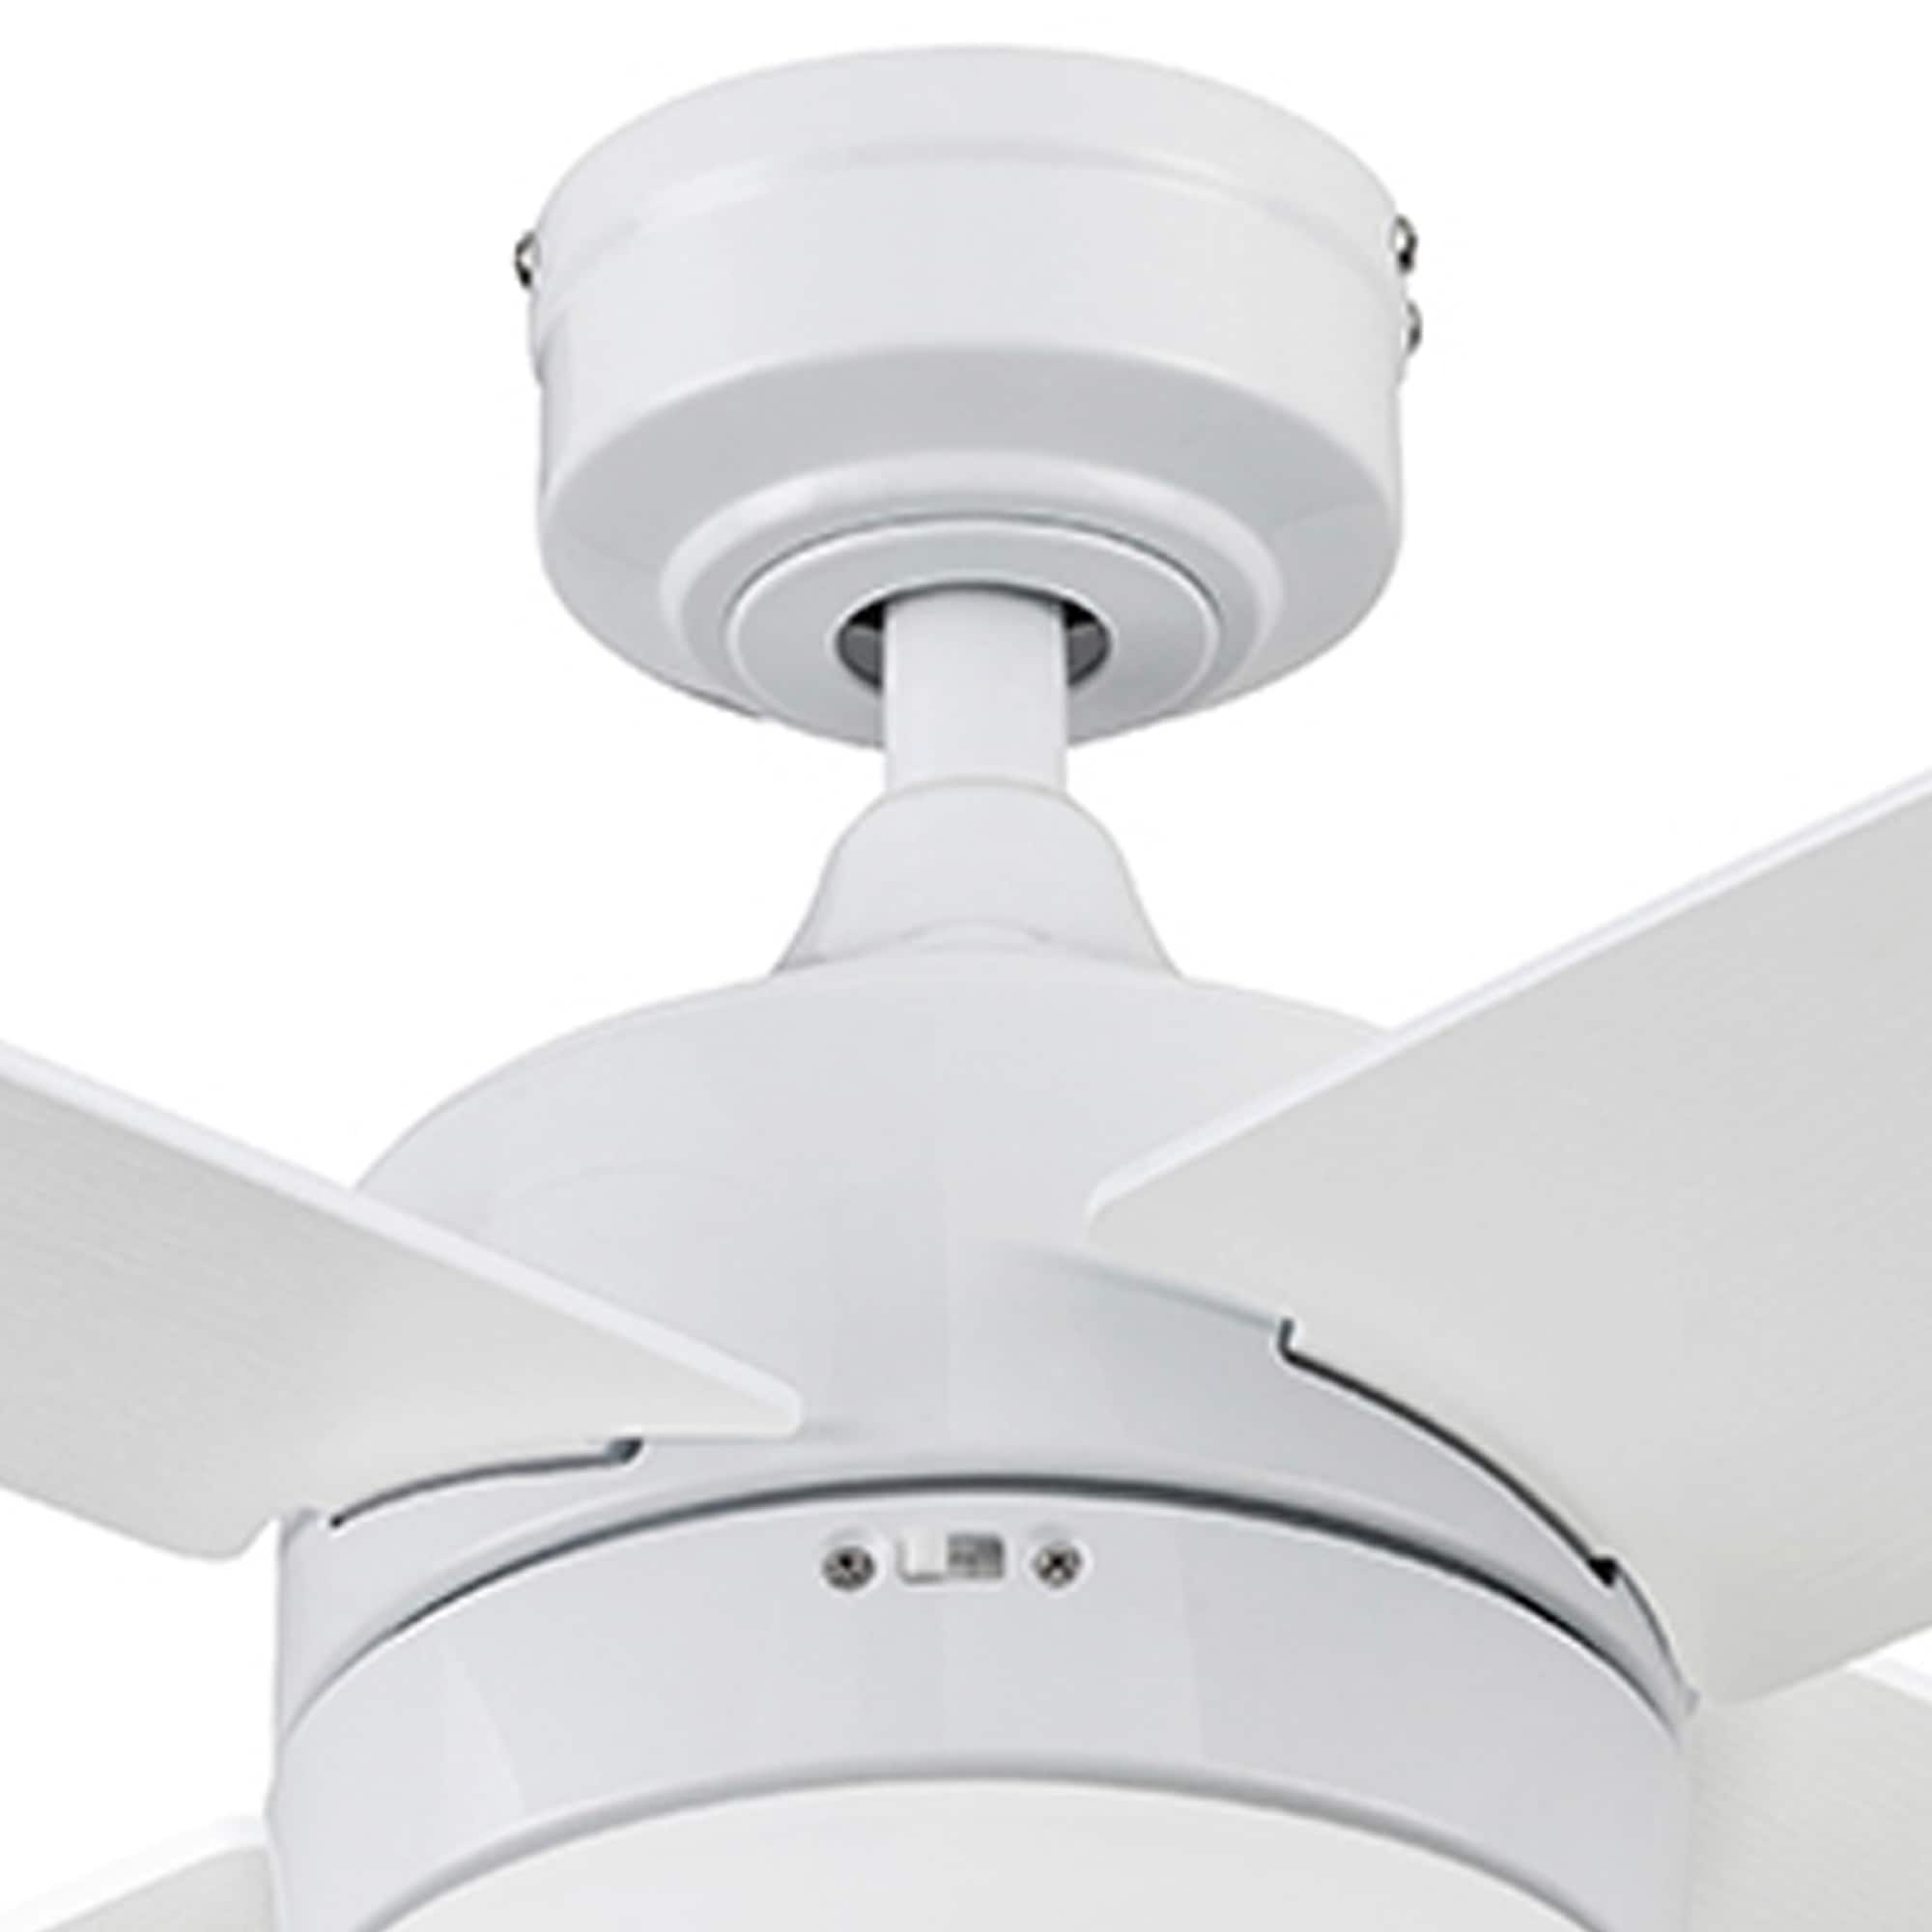 Prominence Home Atlas 44-in Bright White Indoor Ceiling Fan with